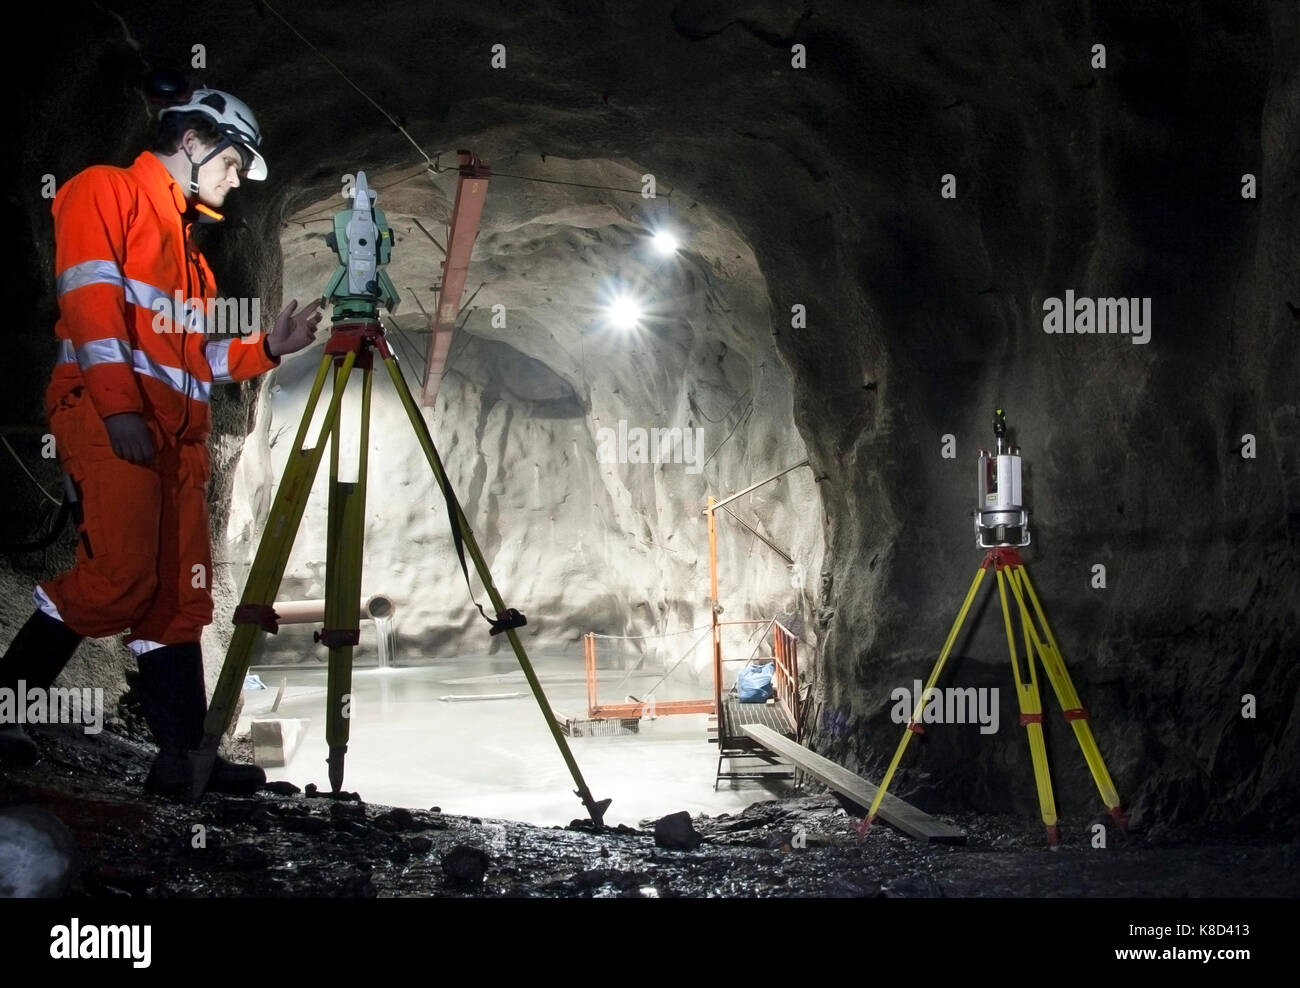 SWEDEN, KIRUNA IRON ORE MINE - FEBRUARY 26, 2012: A land surveyor during his work with surveying and scanning using theodolite or total station. Stock Photo